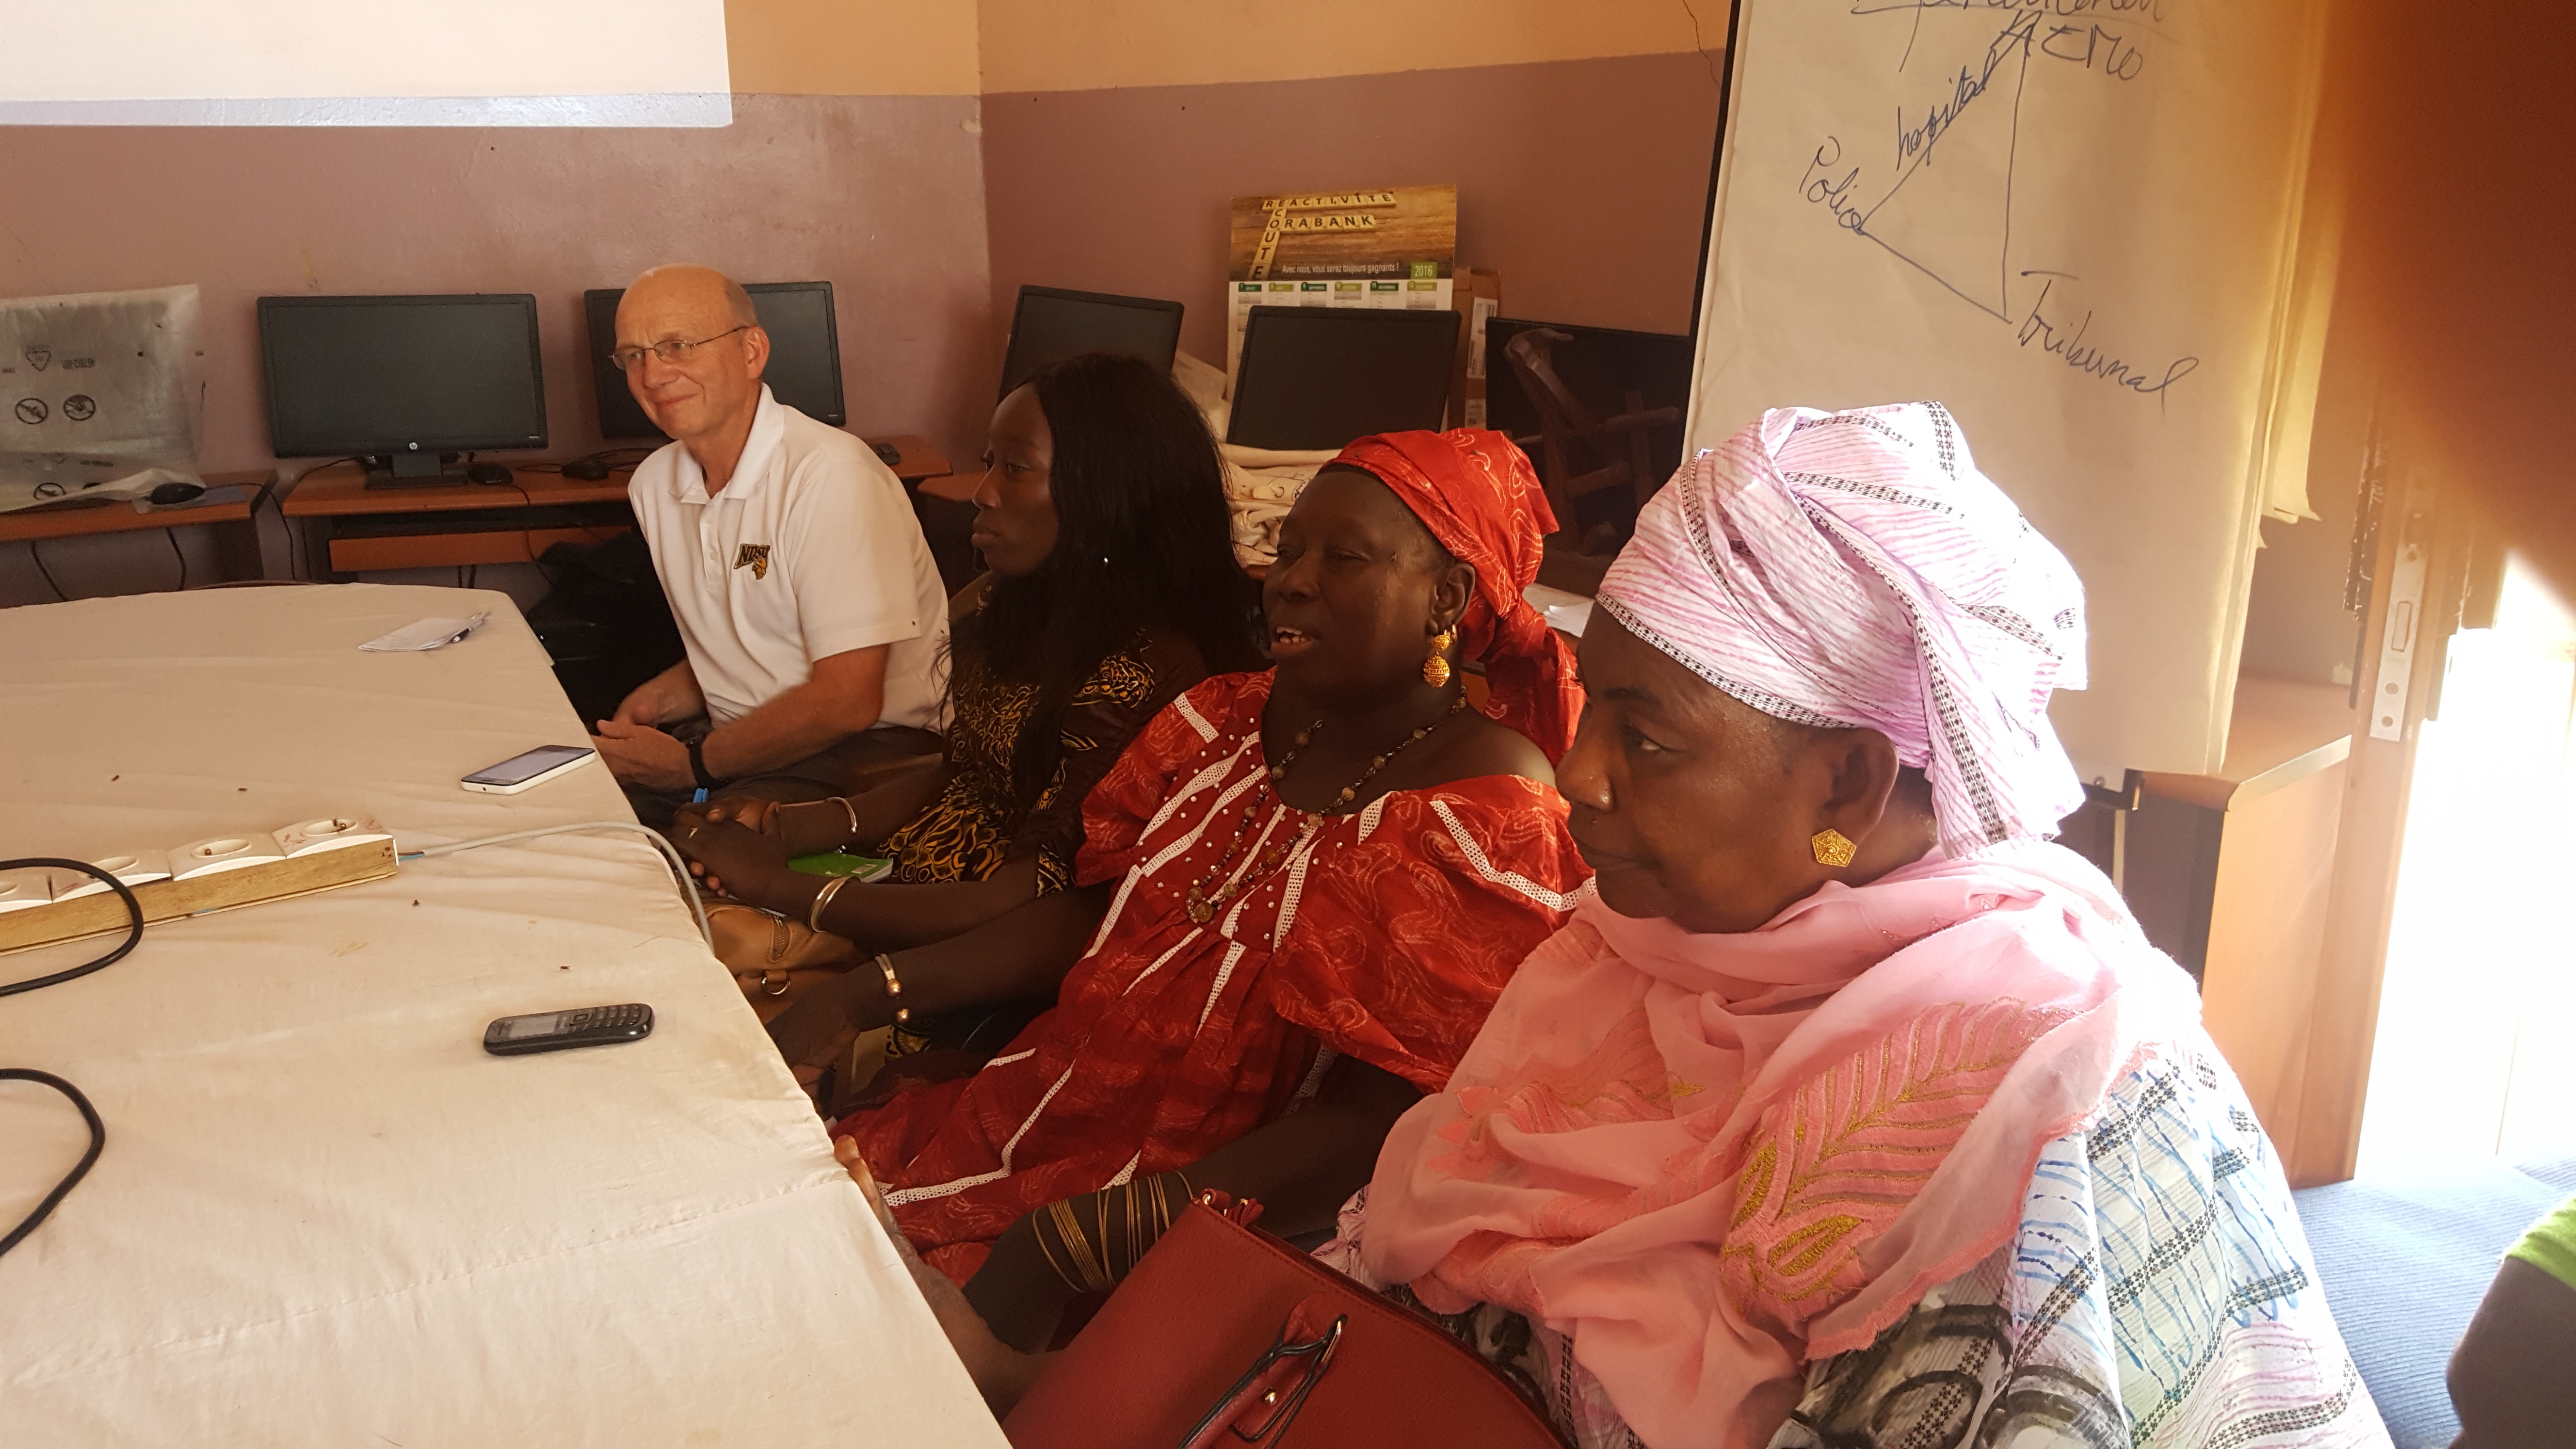 Ransom exchanges information with women's groups while volunteering in Senegal. (NDSU Photo)